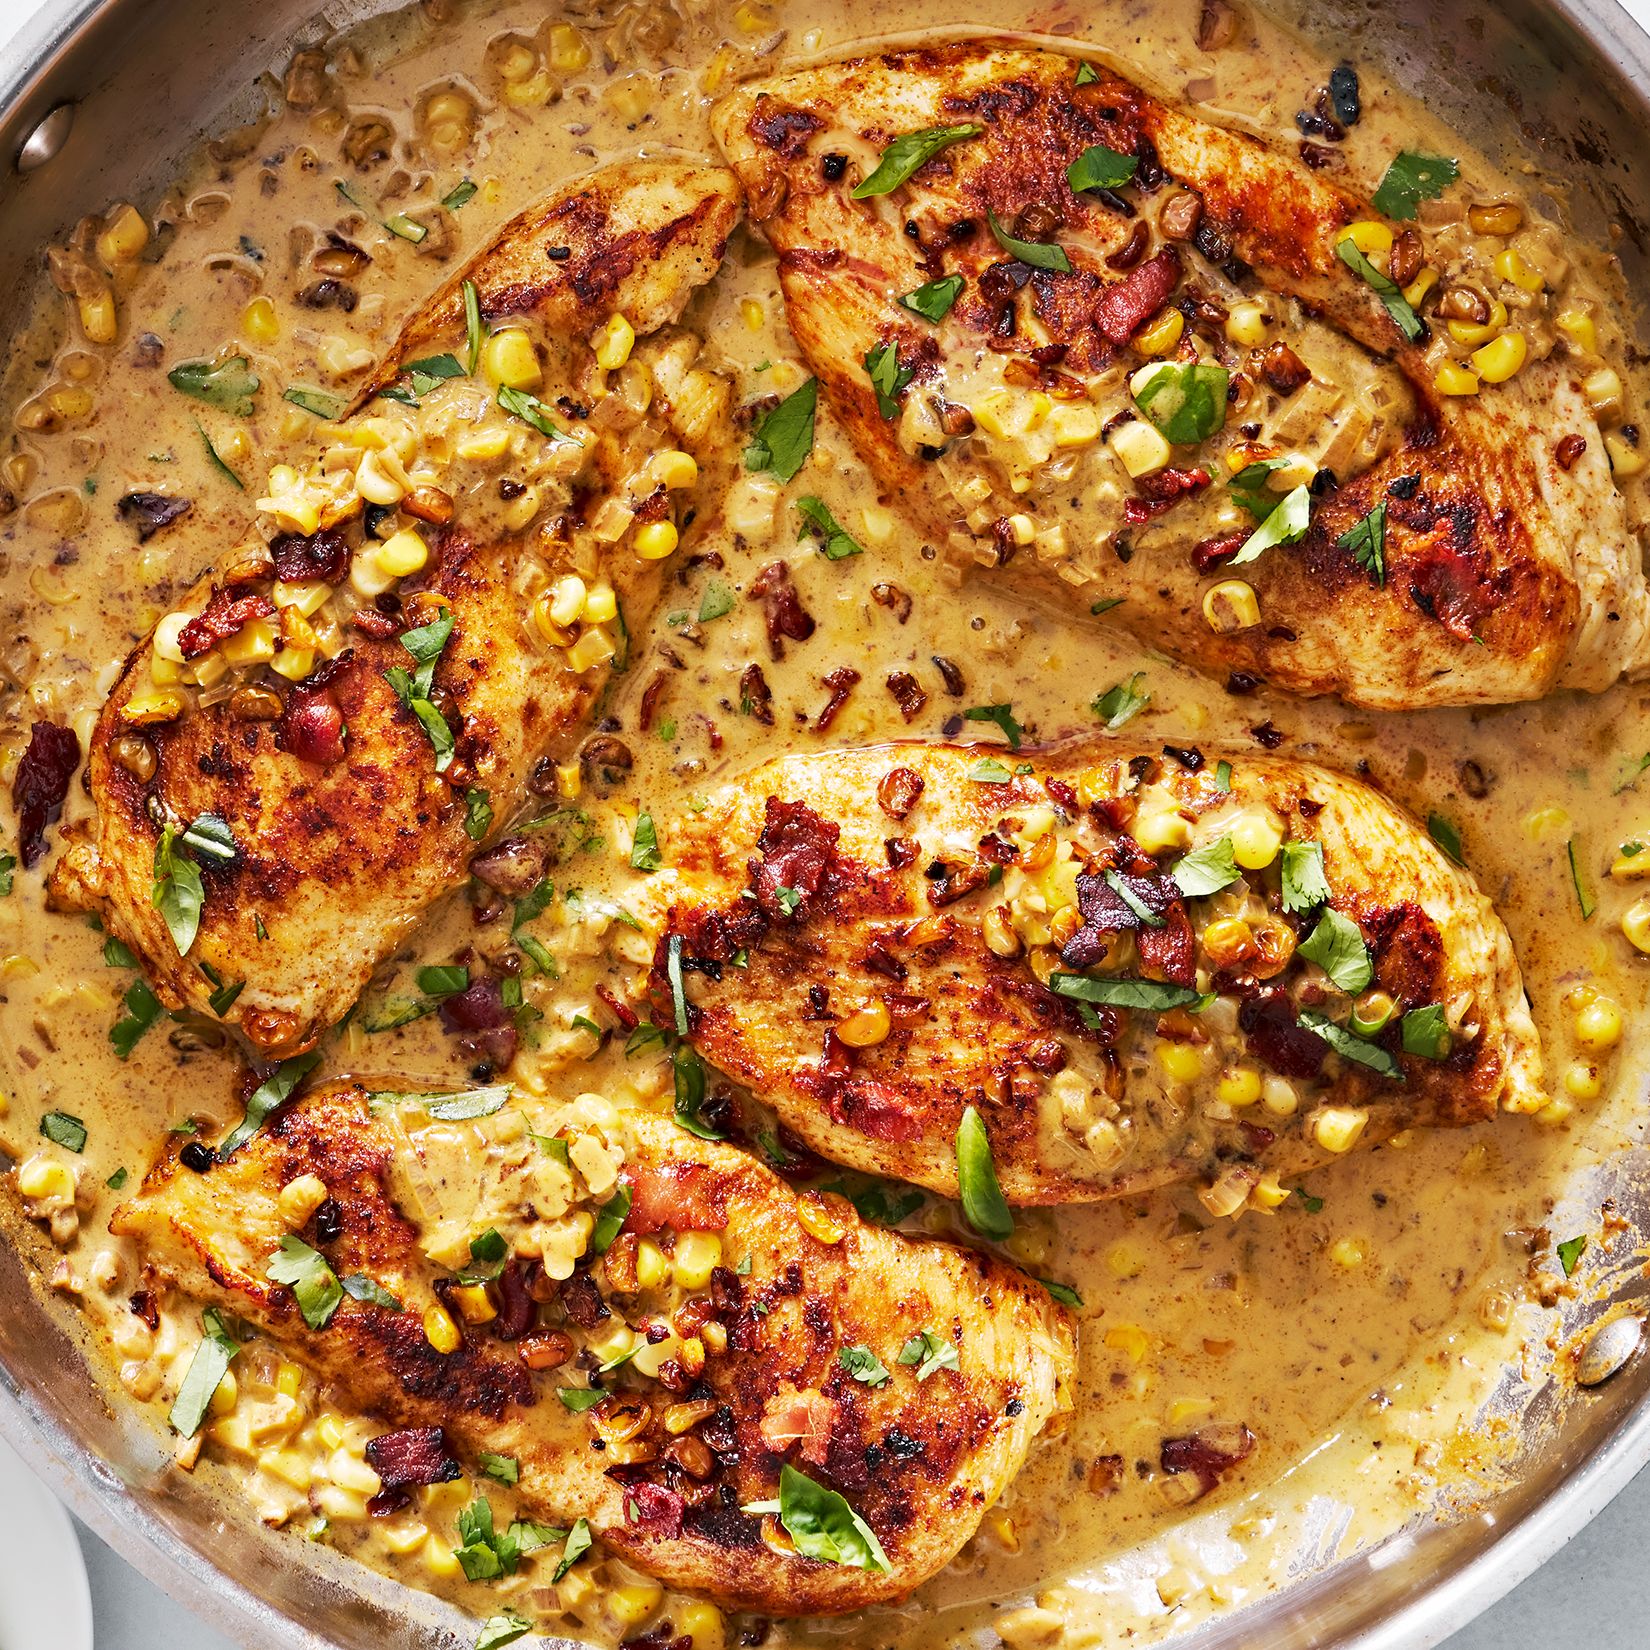 Creamy Chicken & Corn Skillet Is The Summer Dinner We're Making Over & Over